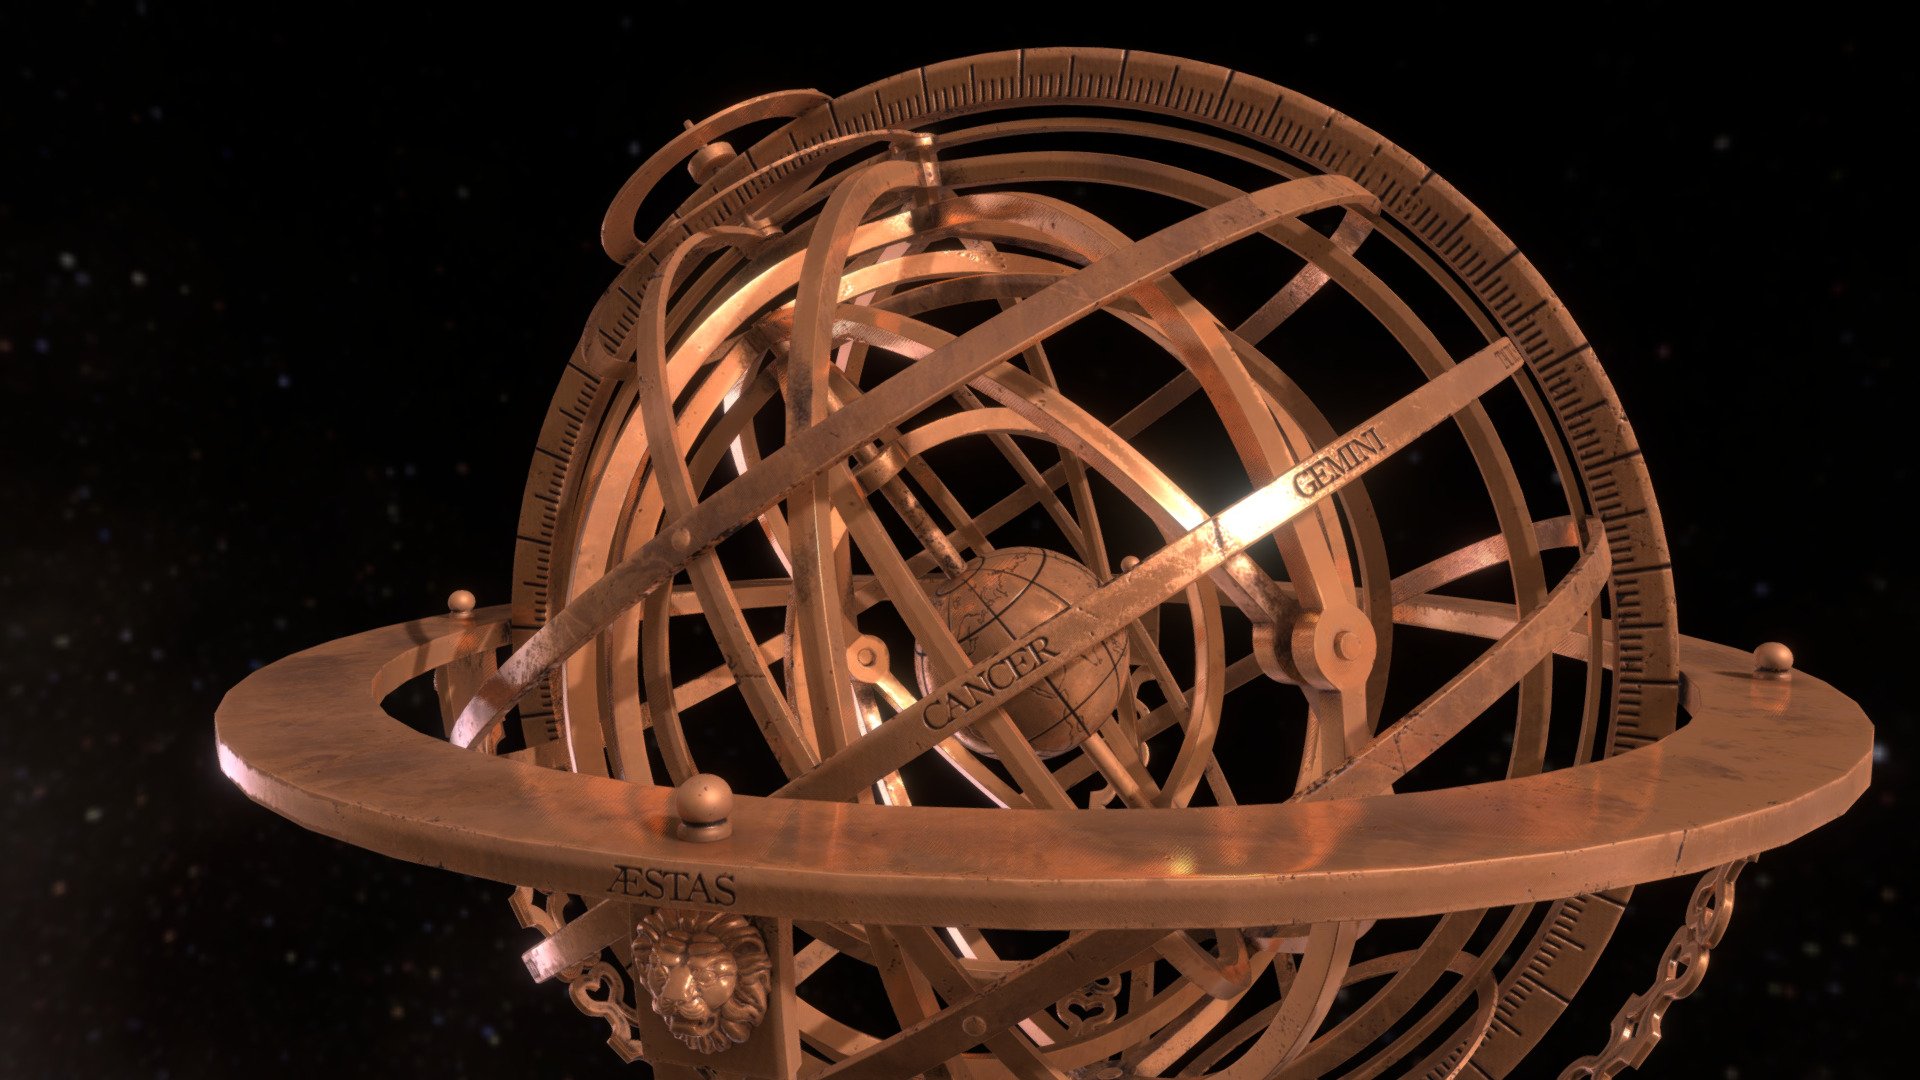 Hi ! 
This is my last 3D project about astronomy !
This astronomical instrument is an armillary sphere which studies the movement of the stars.
Hope you will like it ! :) - Astronomical instrument - 3D model by Julie Schwartz (@julie_schwartz) 3d model